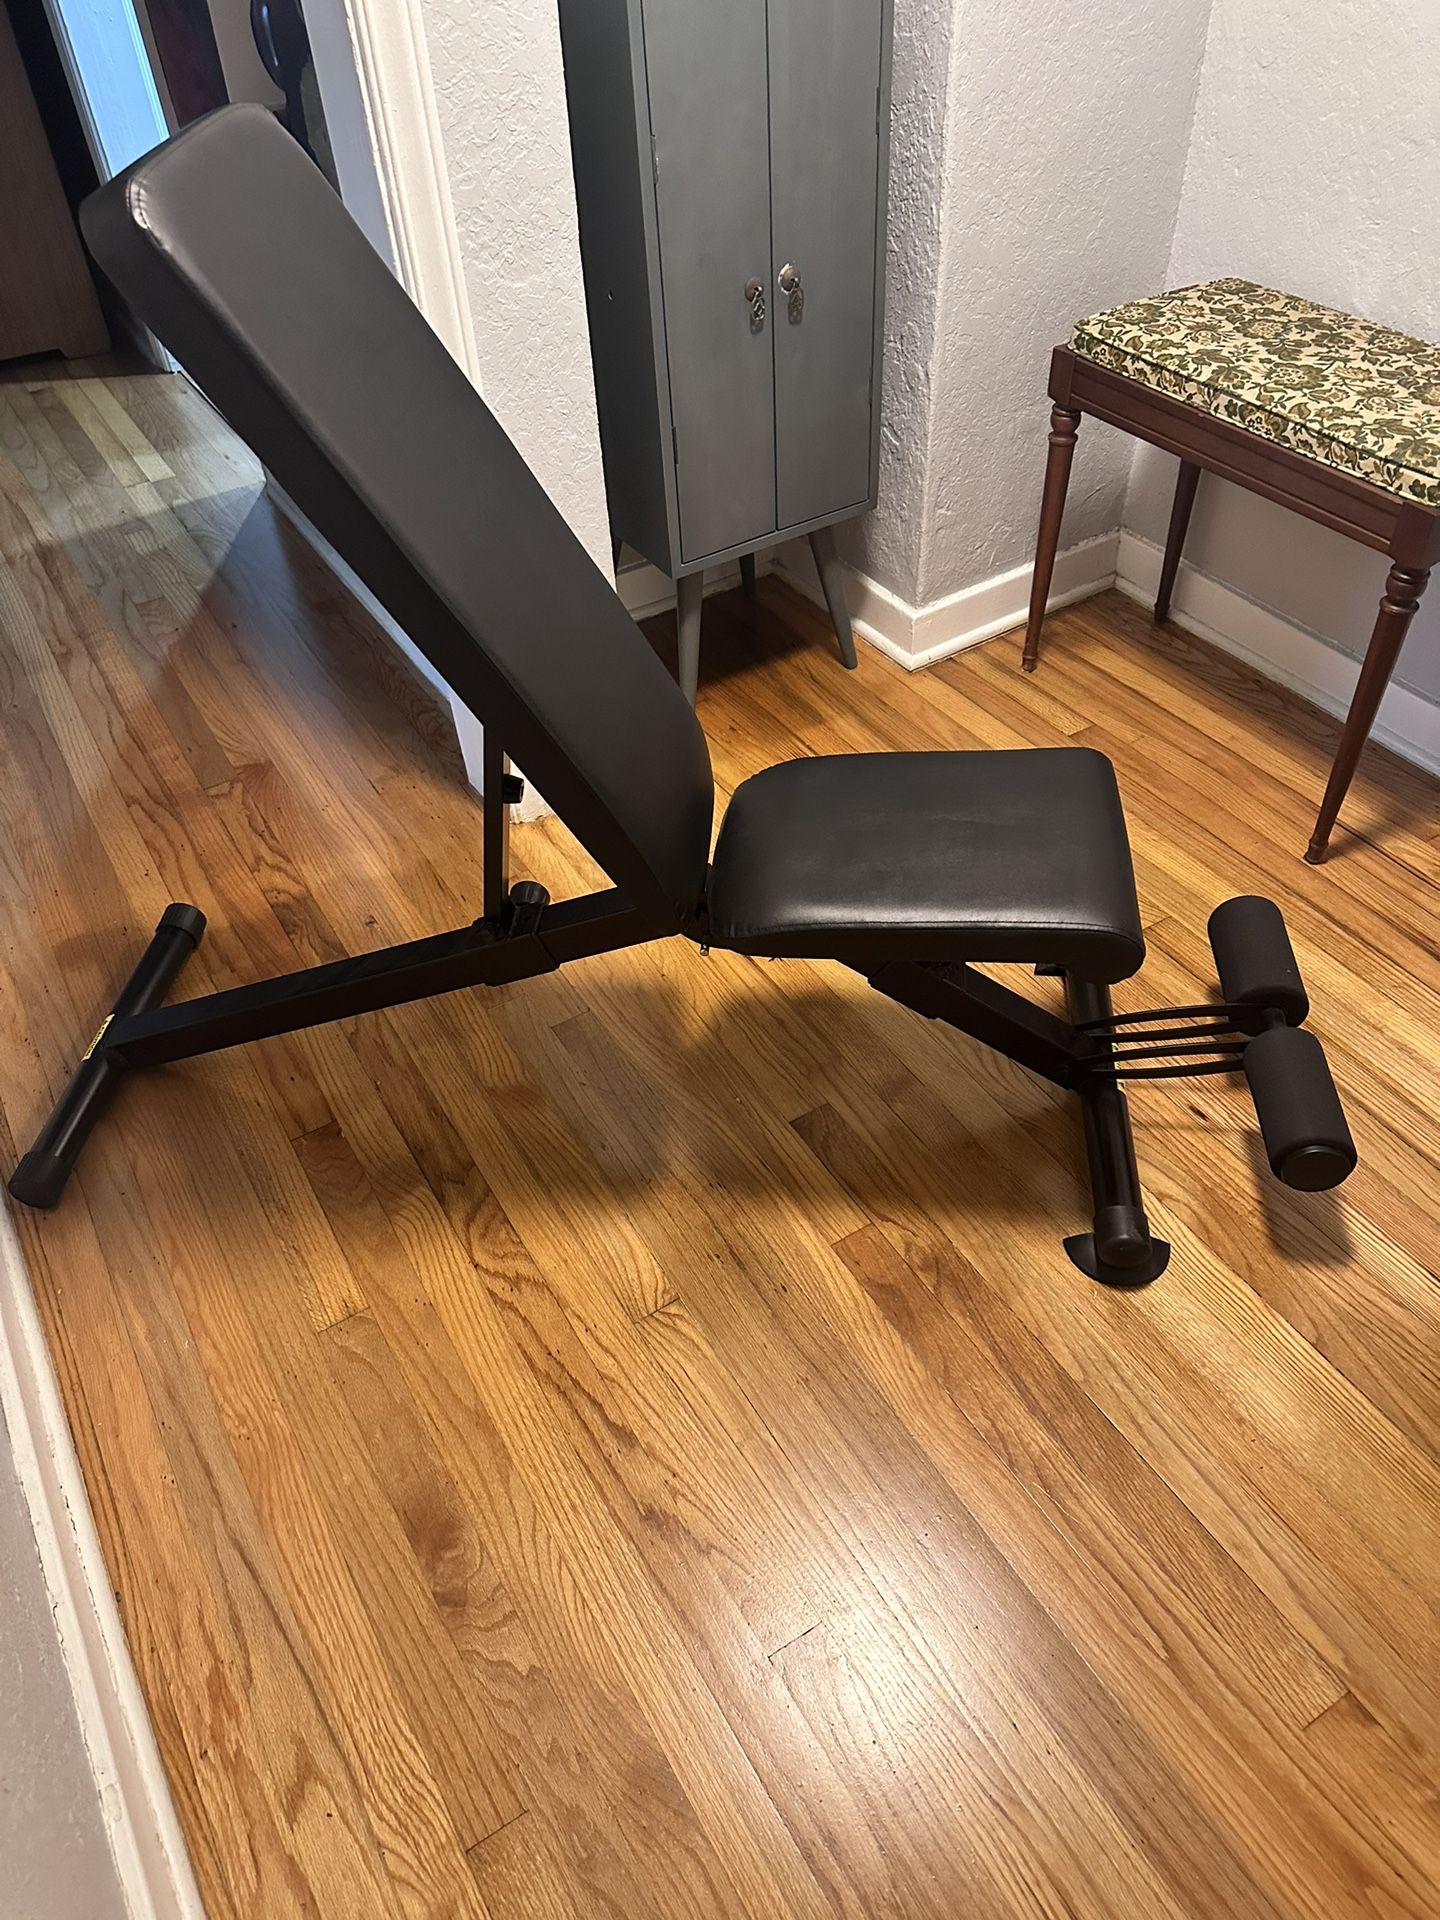 RitFit PWB01 Adjustable Foldable Weight Bench